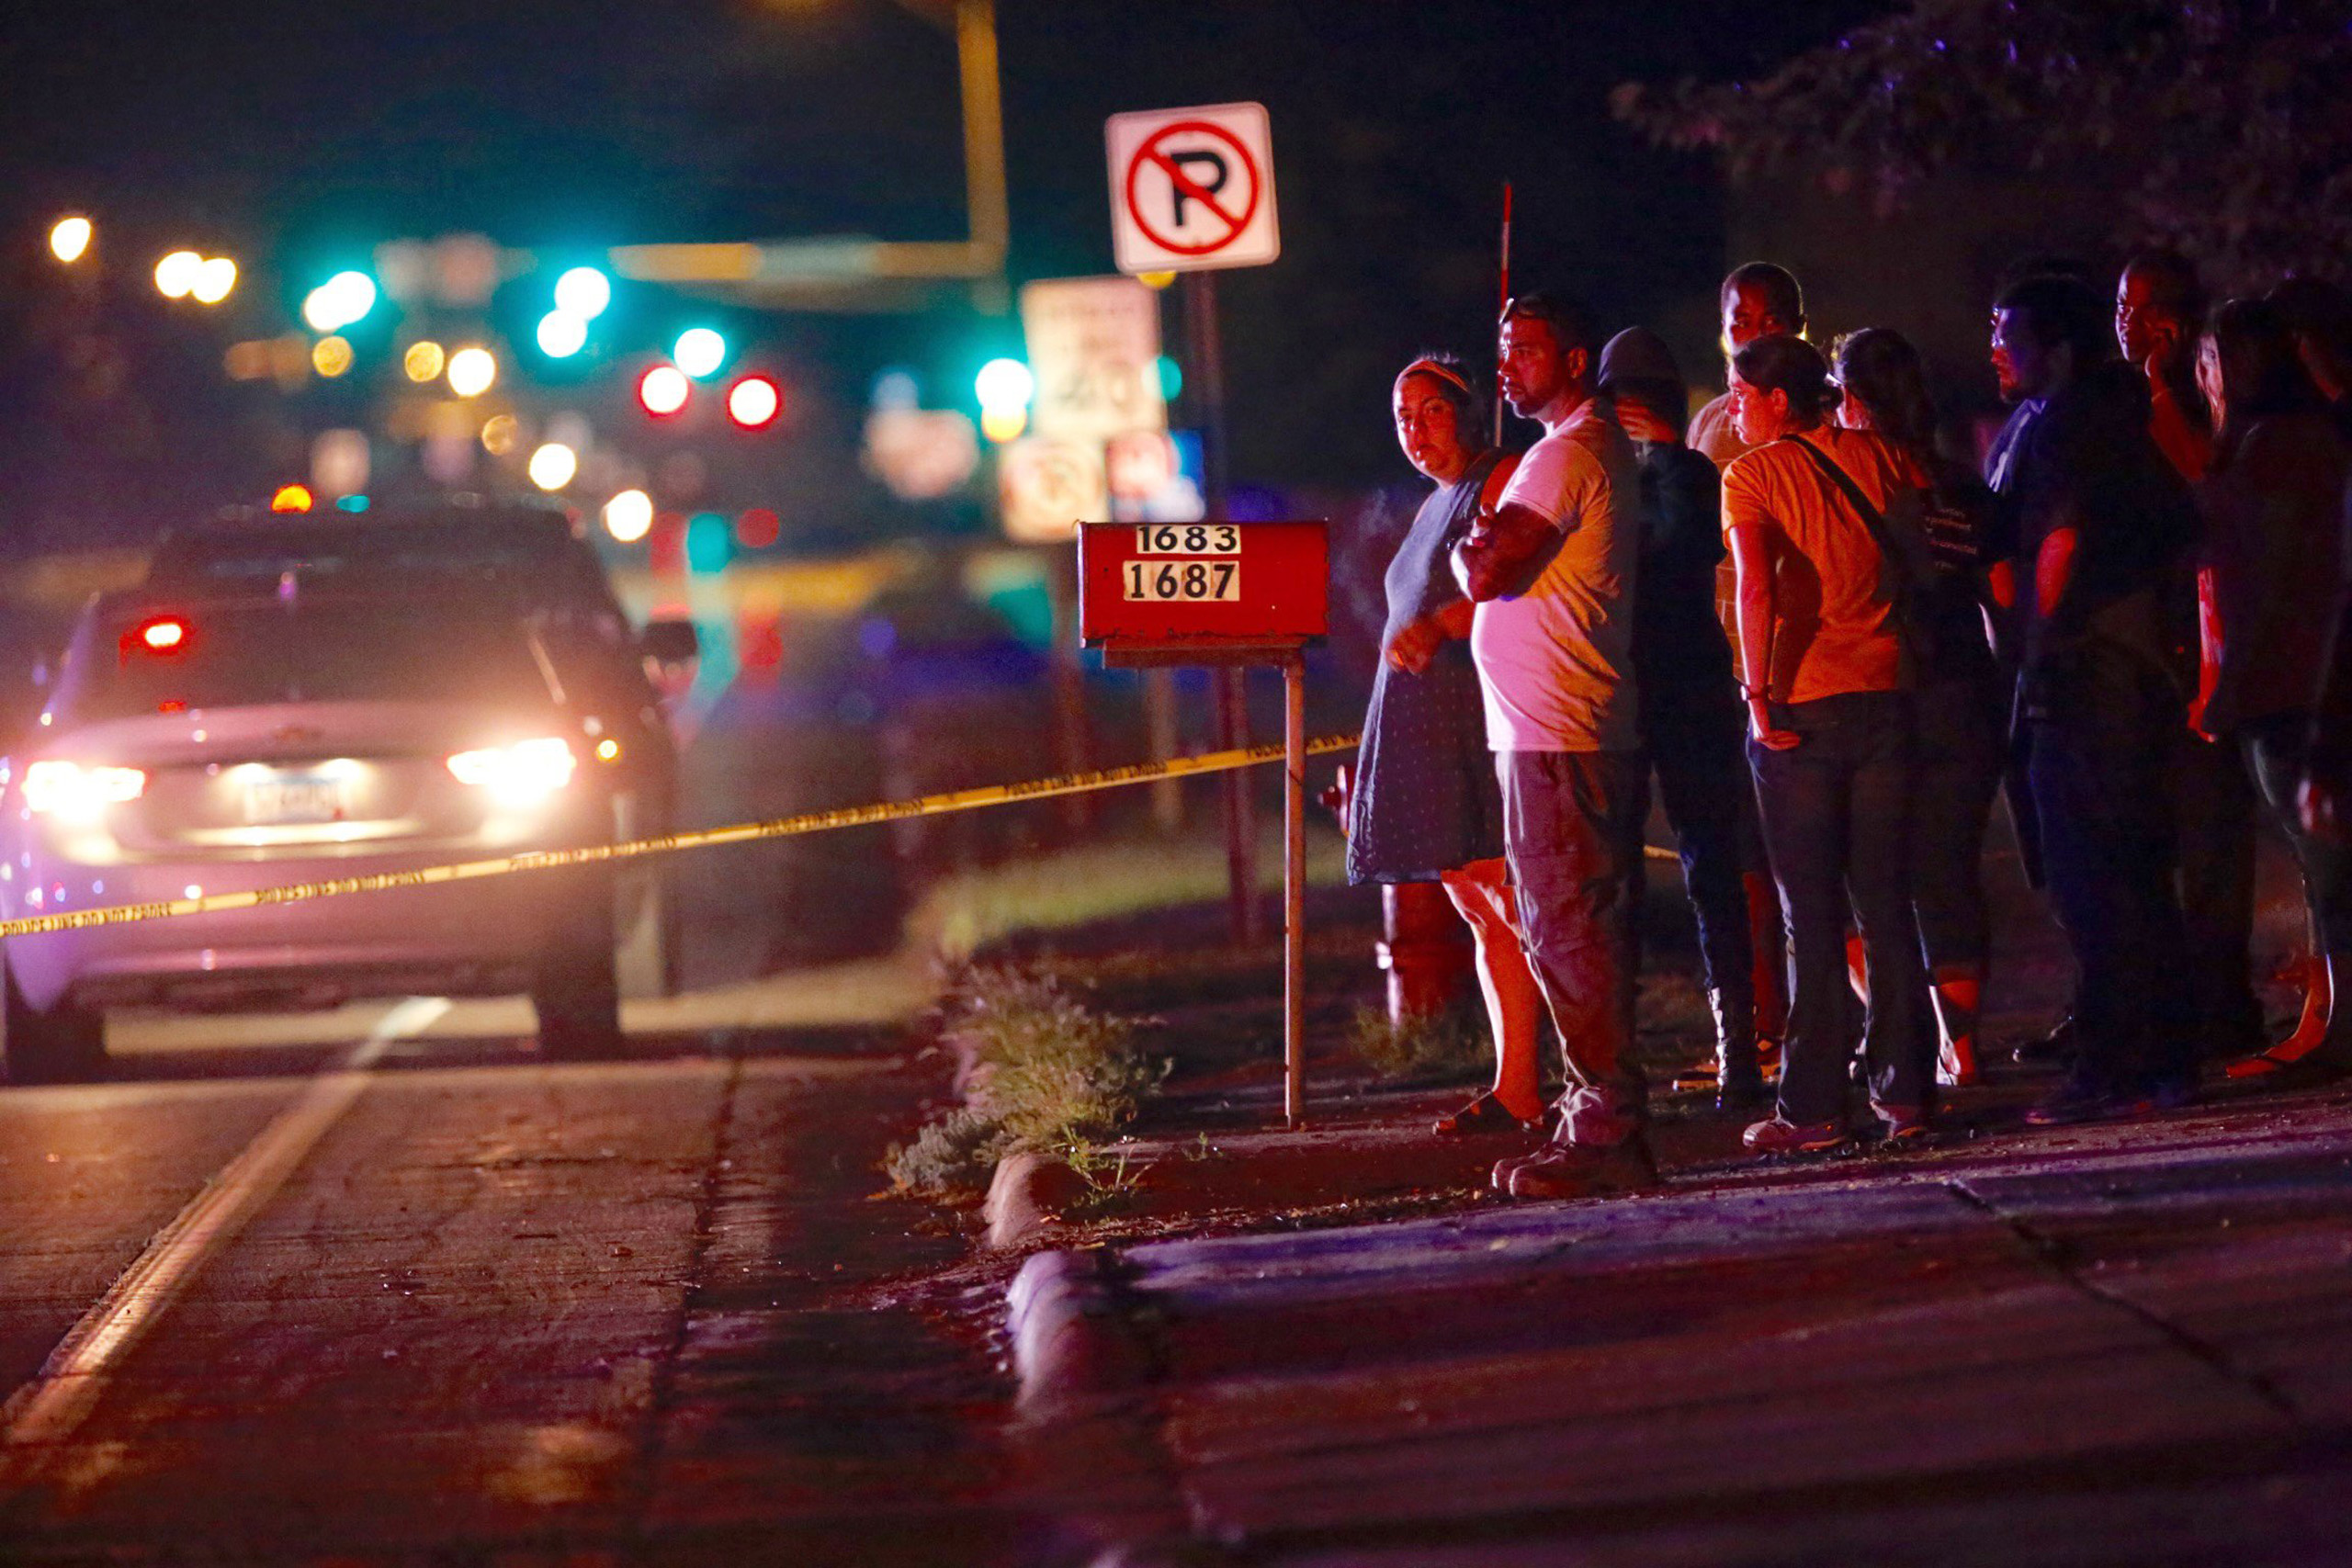 A crowd gathers at the scene of the shooting of Philando Castile by a St. Anthony Police officer in Falcon Heights, Minn. on July 6, 2016. (Leila Navidi—Star Tribune/AP)